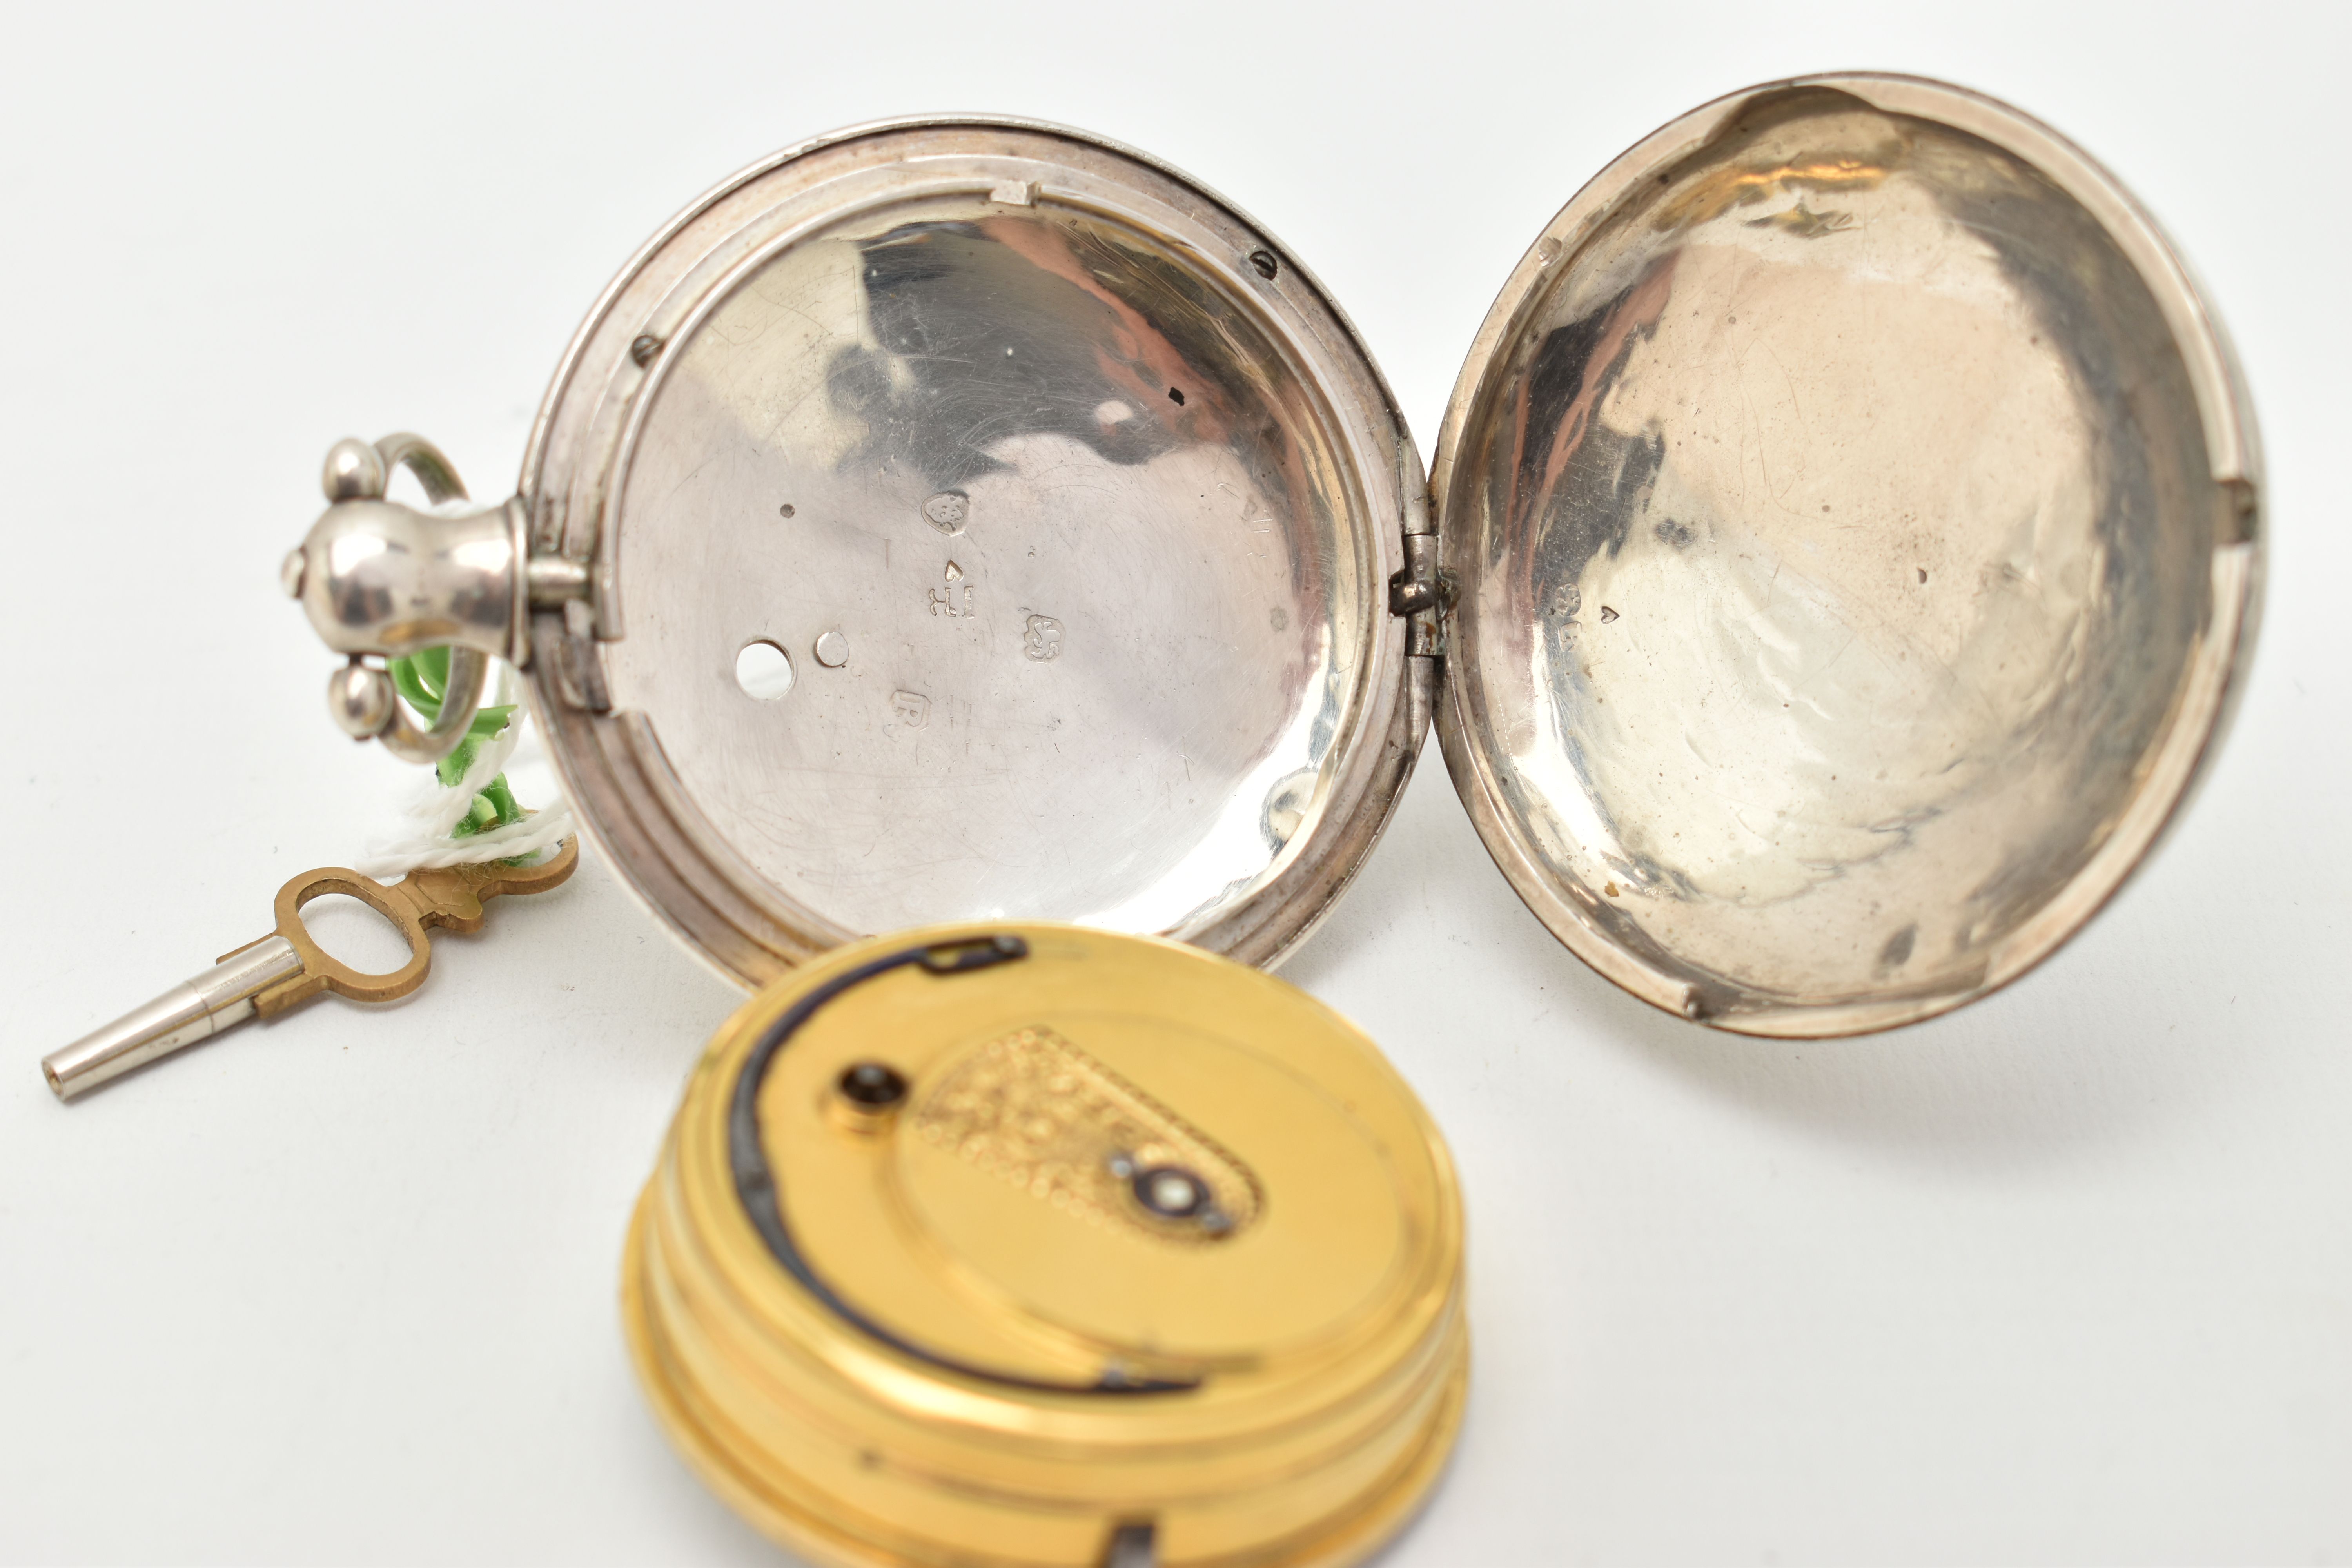 A GEORGE III SILVER FULL HUNTER POCKET WATCH, key wound movement, Roman numerals, plain polished - Image 4 of 5